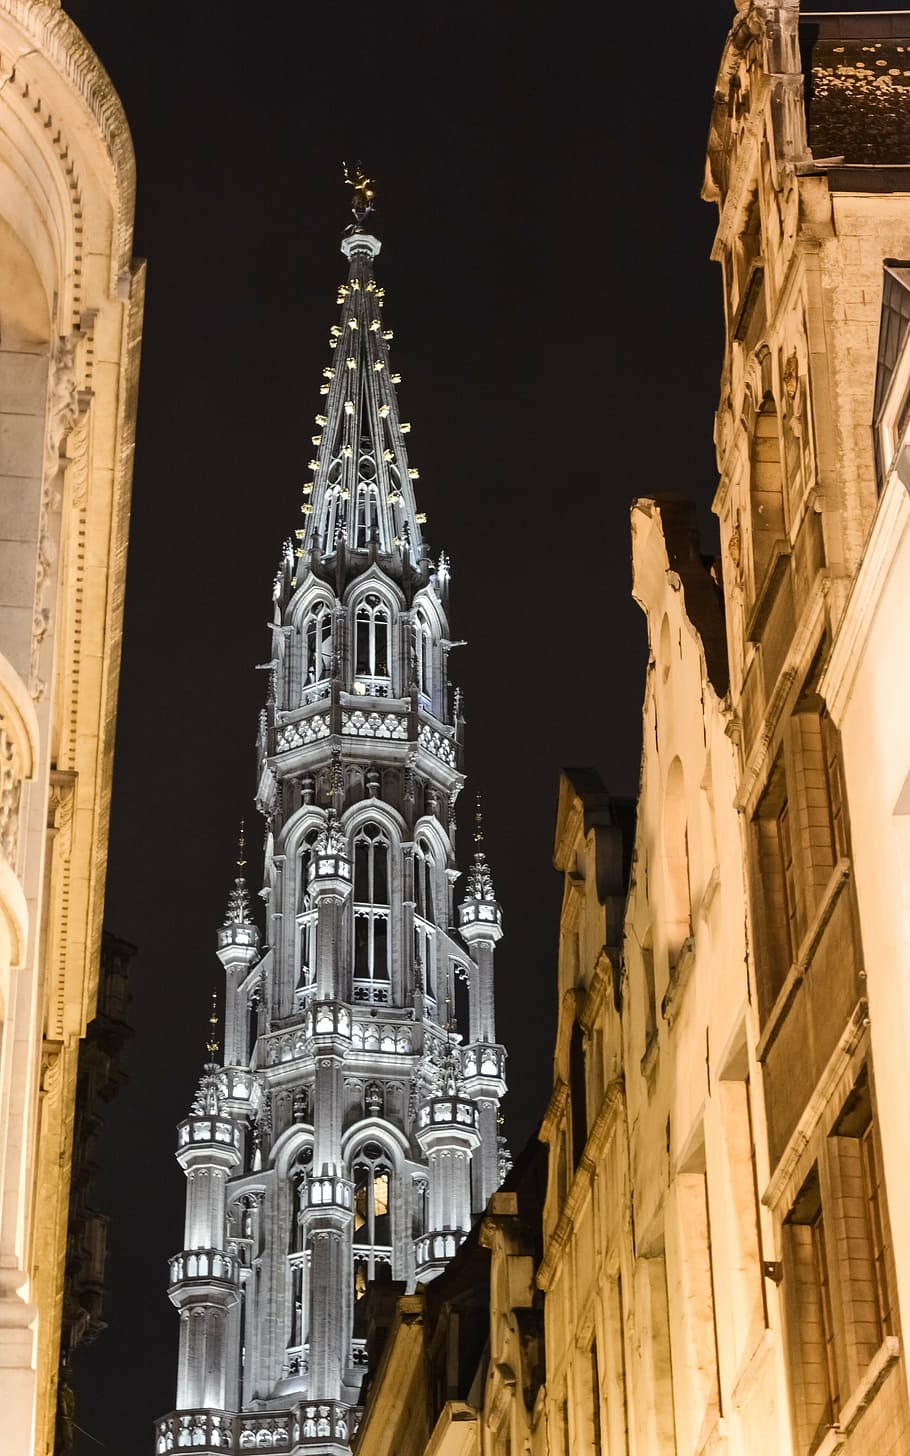 brussels, large square, saint michel, belgium, architecture, tower, bell tower, night, light, built structure